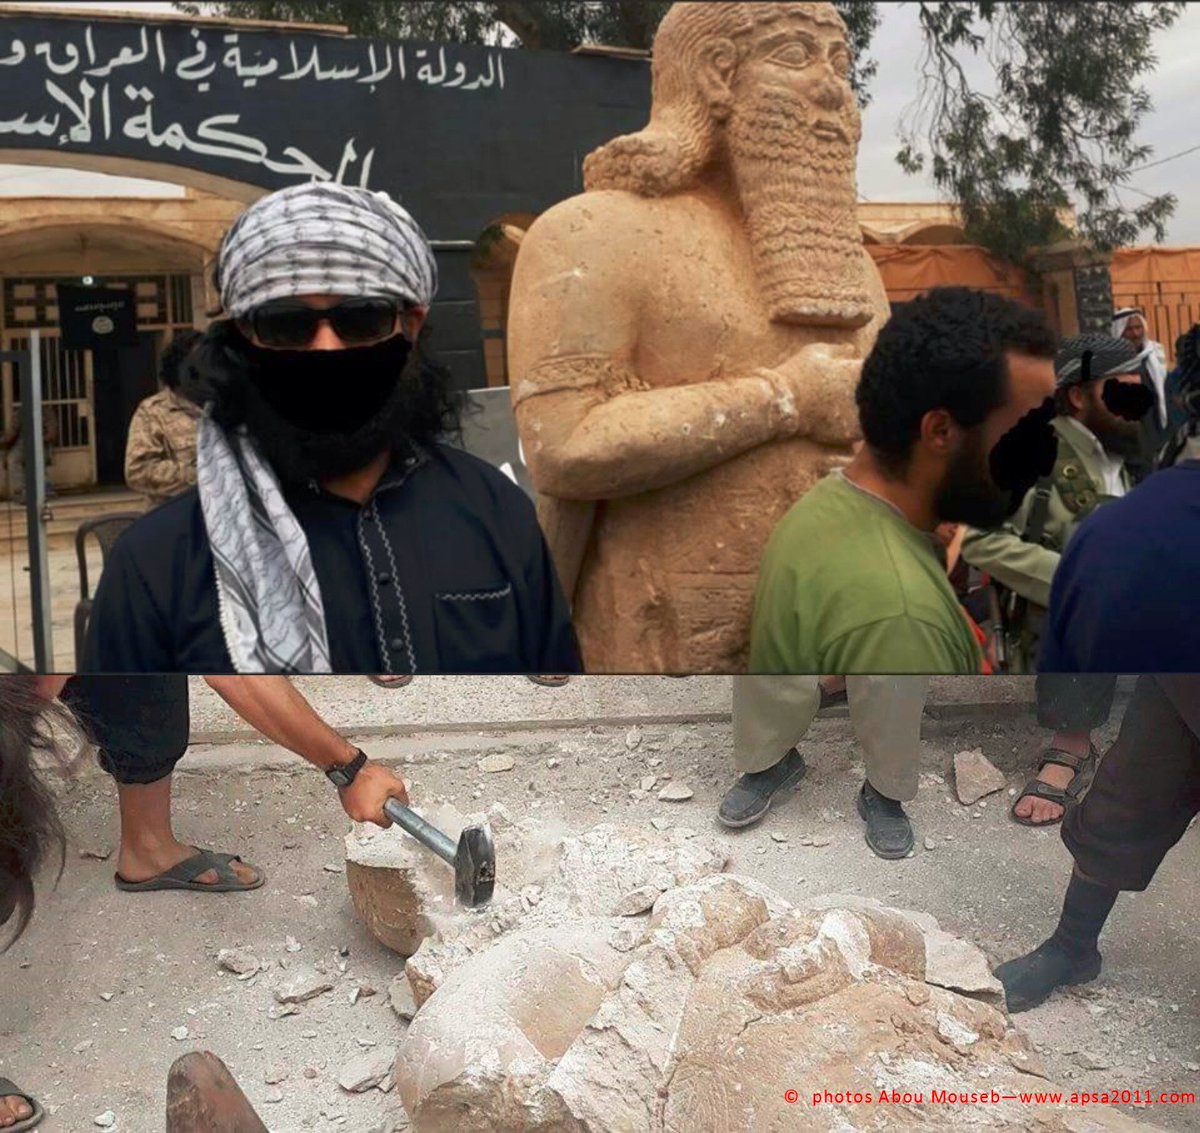 High officials set up monuments like Assyrian kings used to, except not quite claiming to be kings themselves, just stating that they led armies and built things and cared for the people.Some of these were found by ISIS in 2015 and smashed.